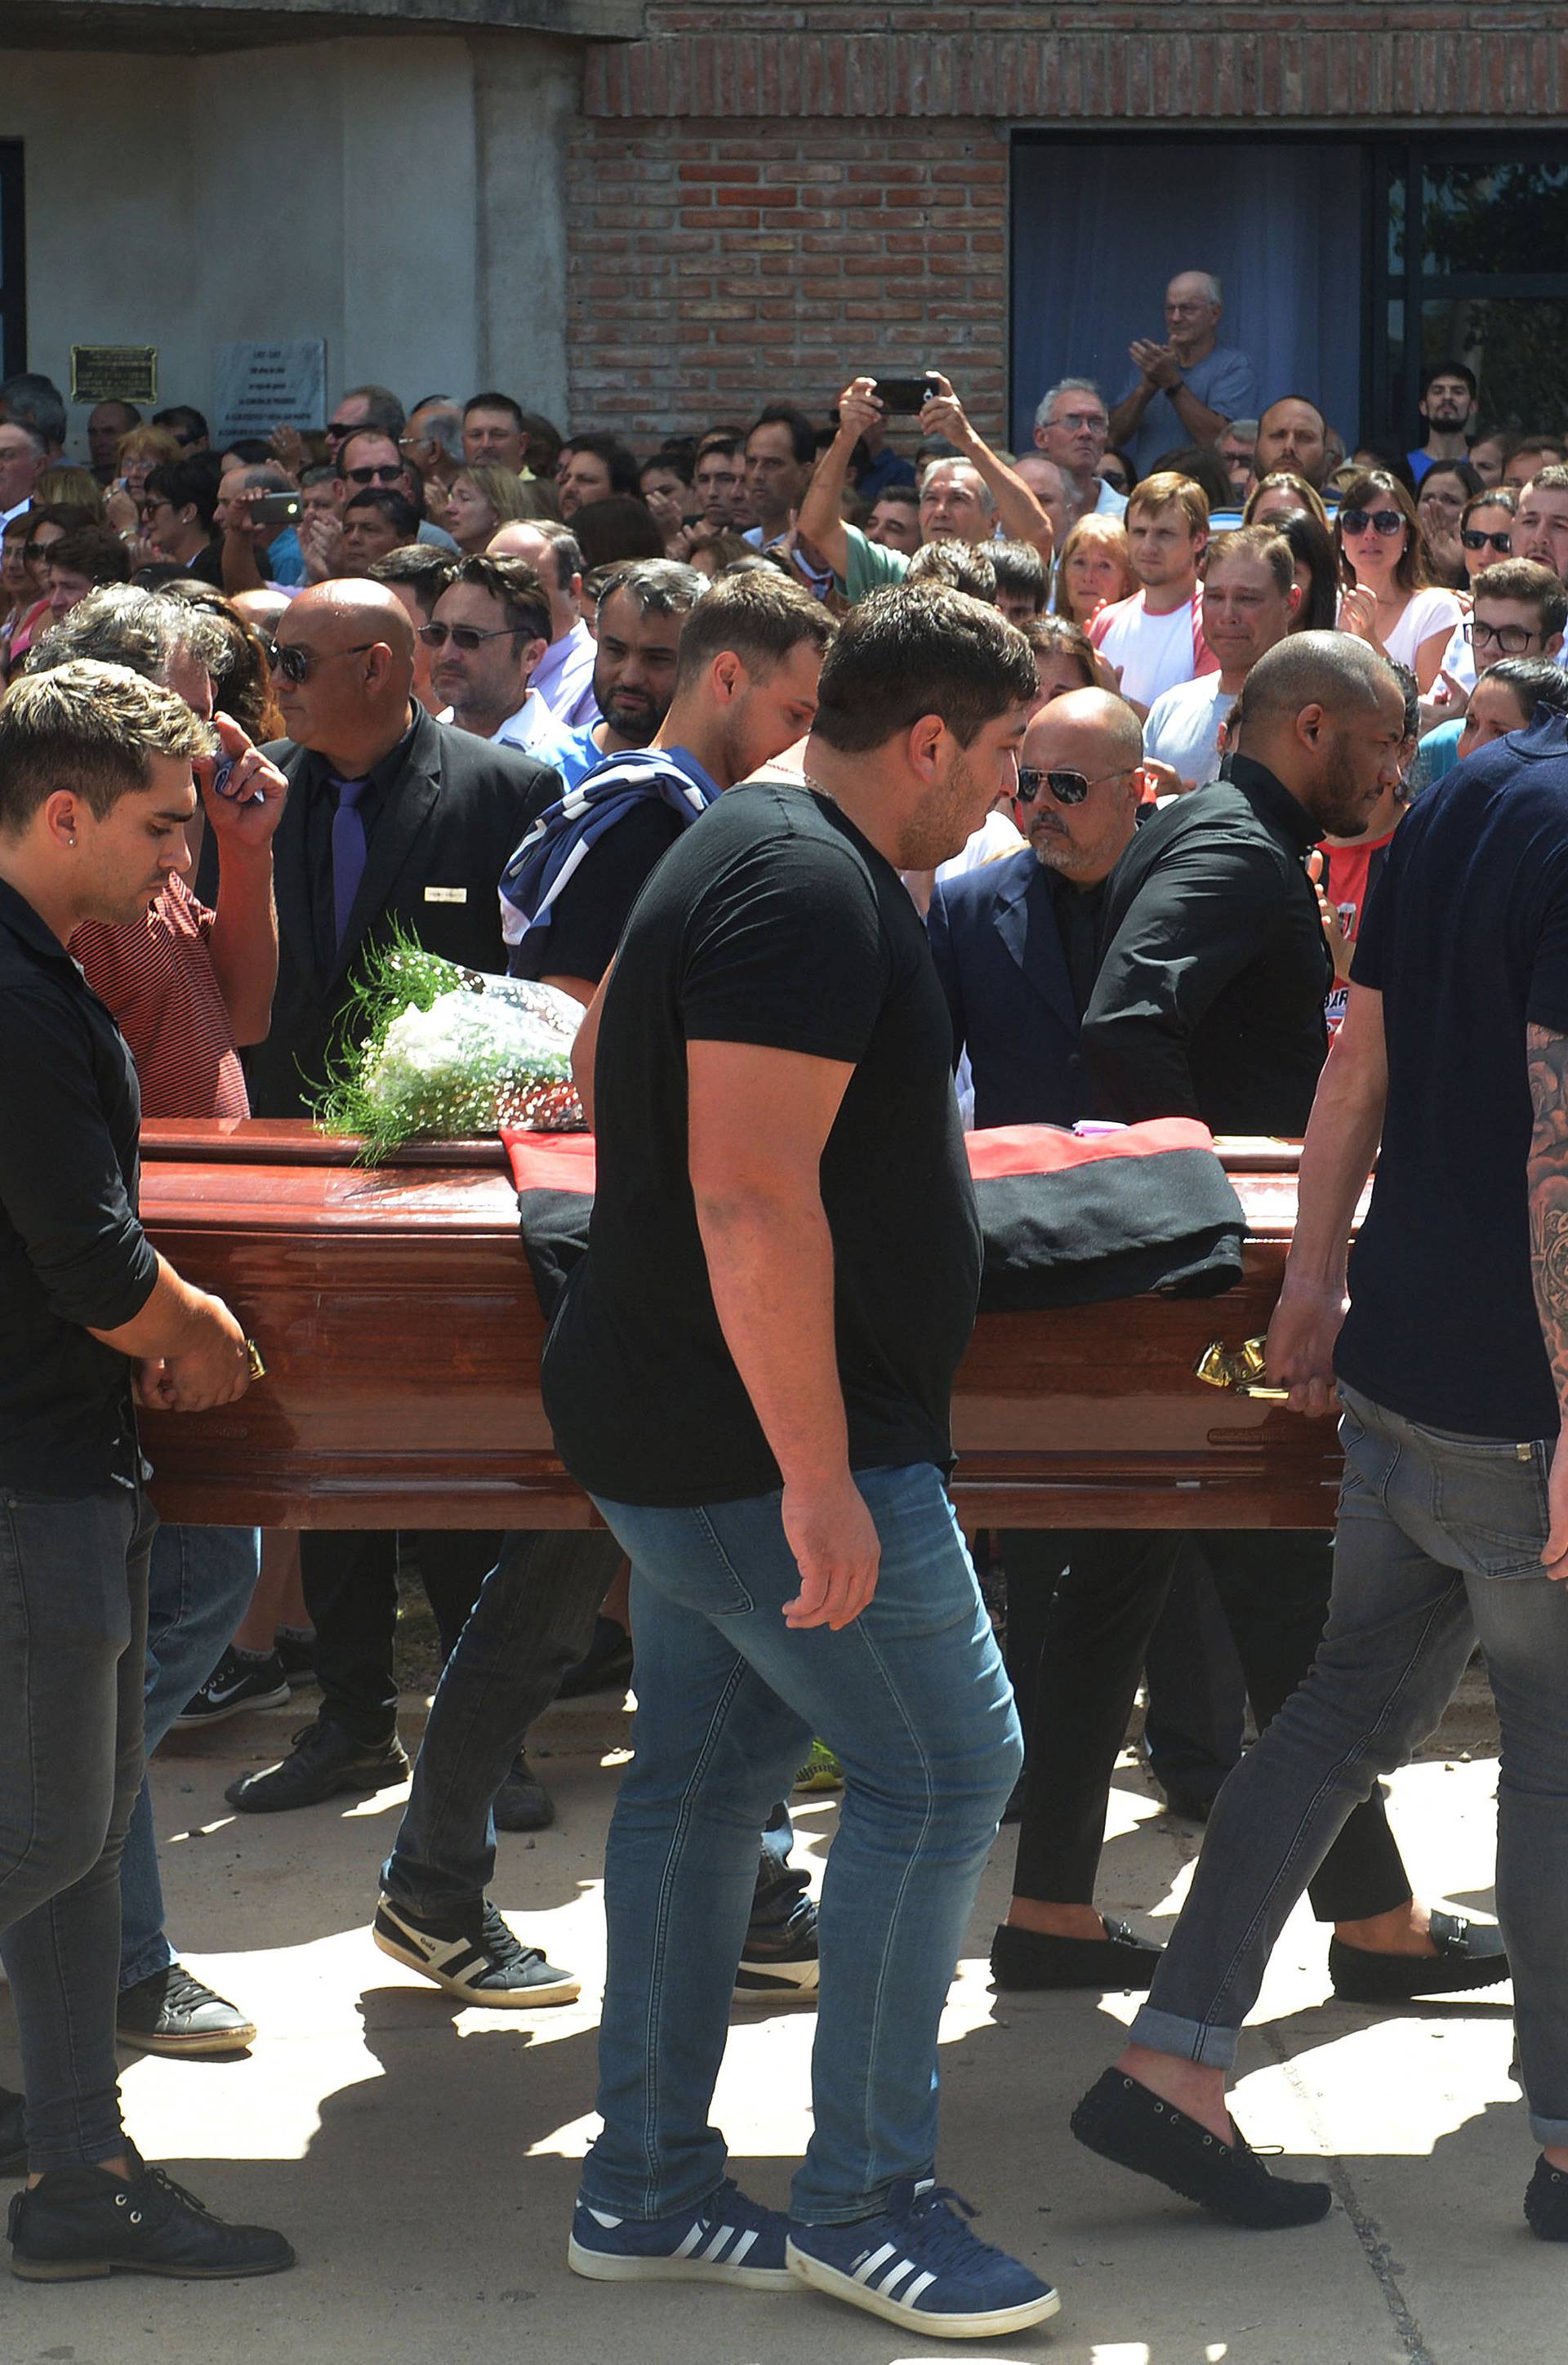 Family and friends carry the coffin of Emiliano Sala, soccer player who died in a plane crash in the English Channel, while a crowd attends his wake in Progreso